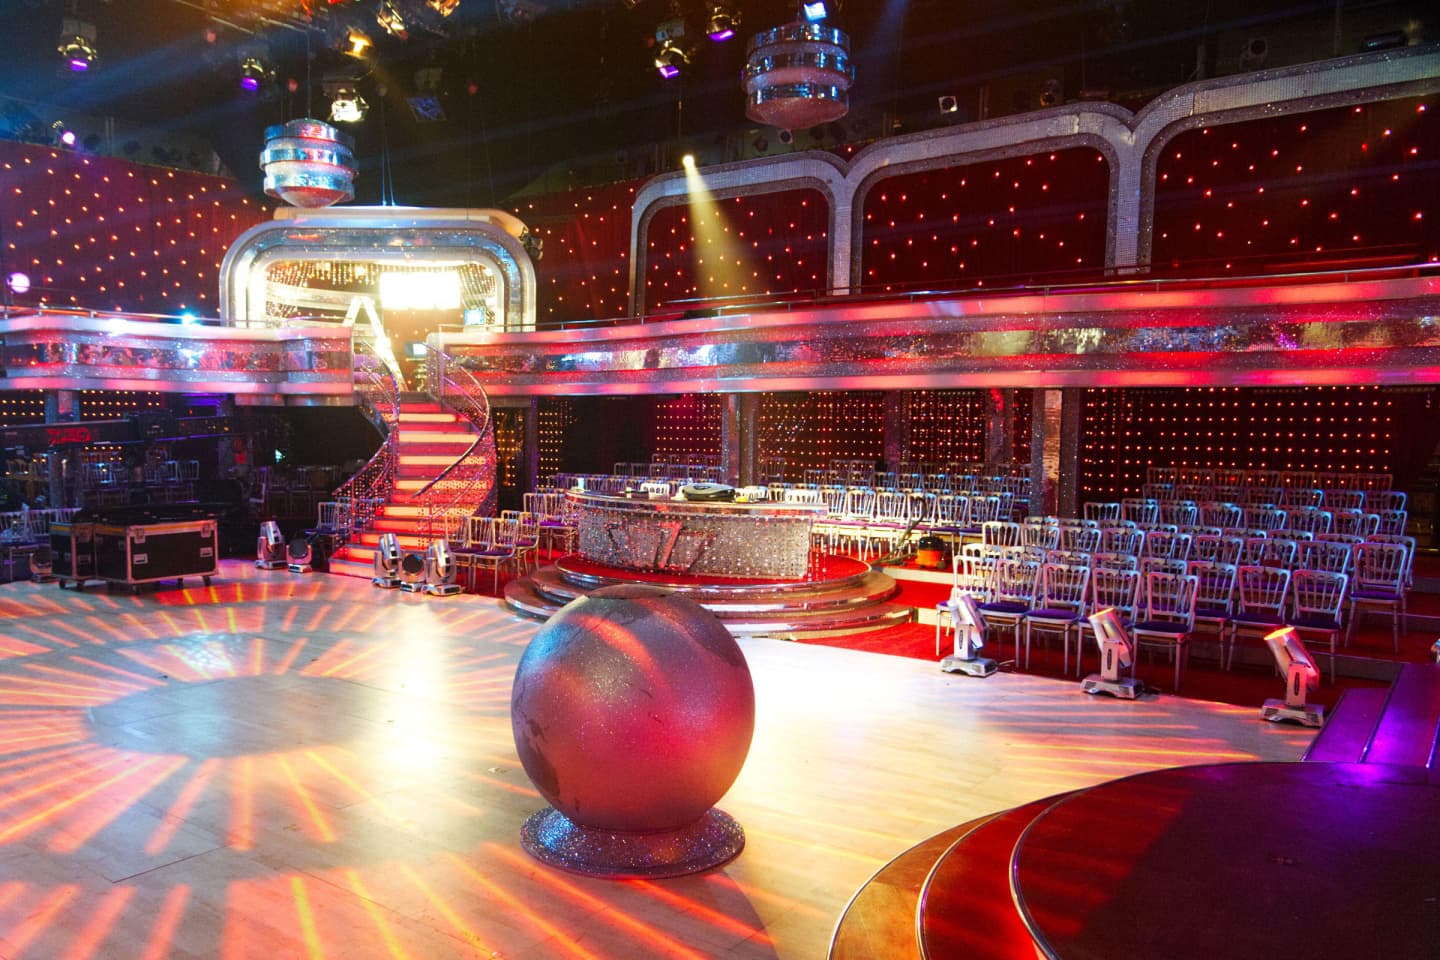 Strictly Come Dancing Tickets Buy or Sell Tickets for Strictly Come